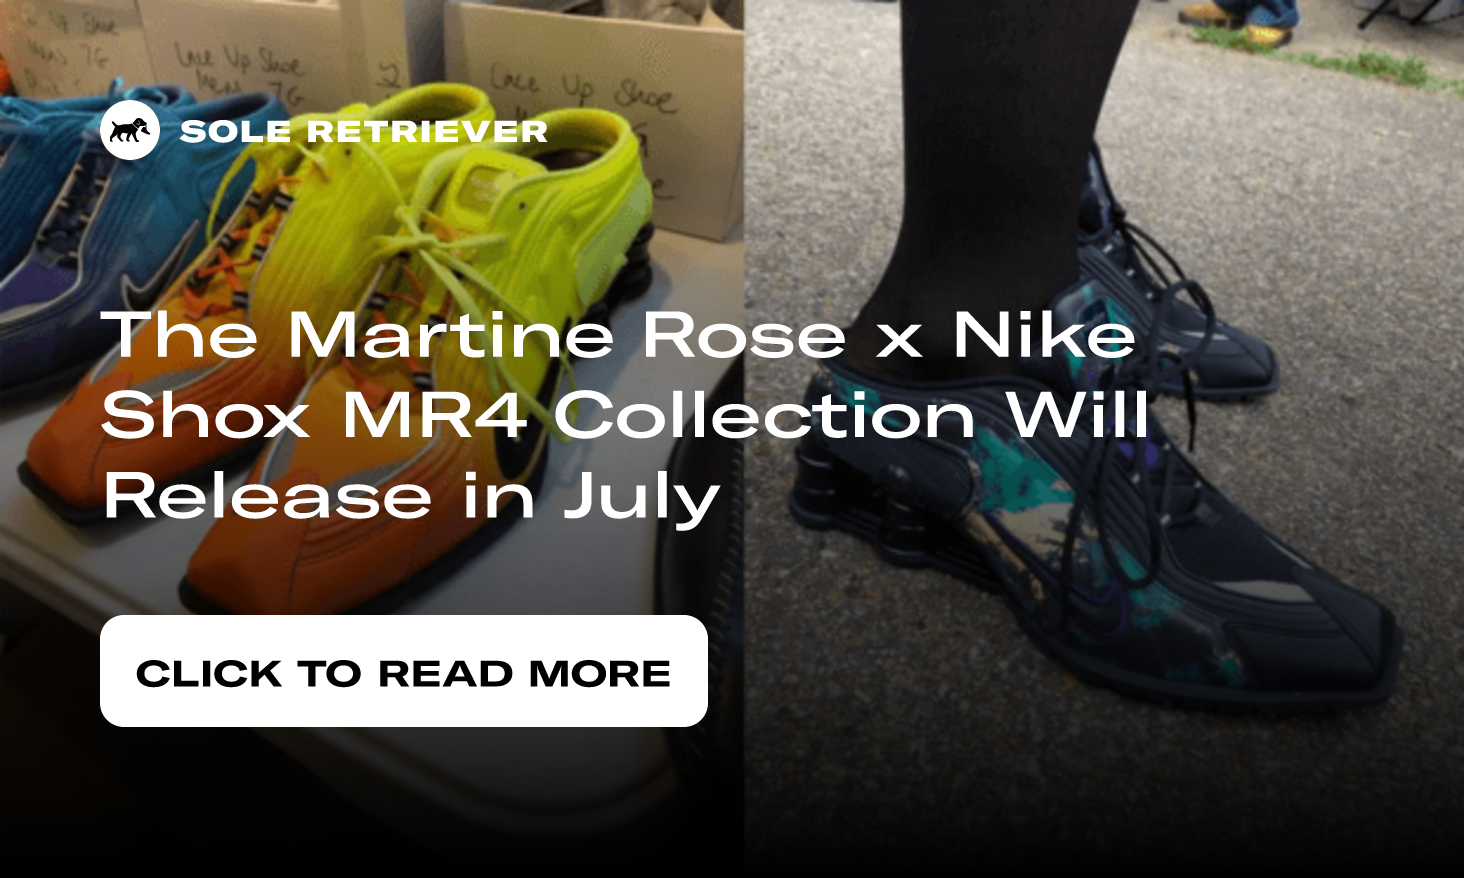 The Martine Rose x Nike Football collection 2023